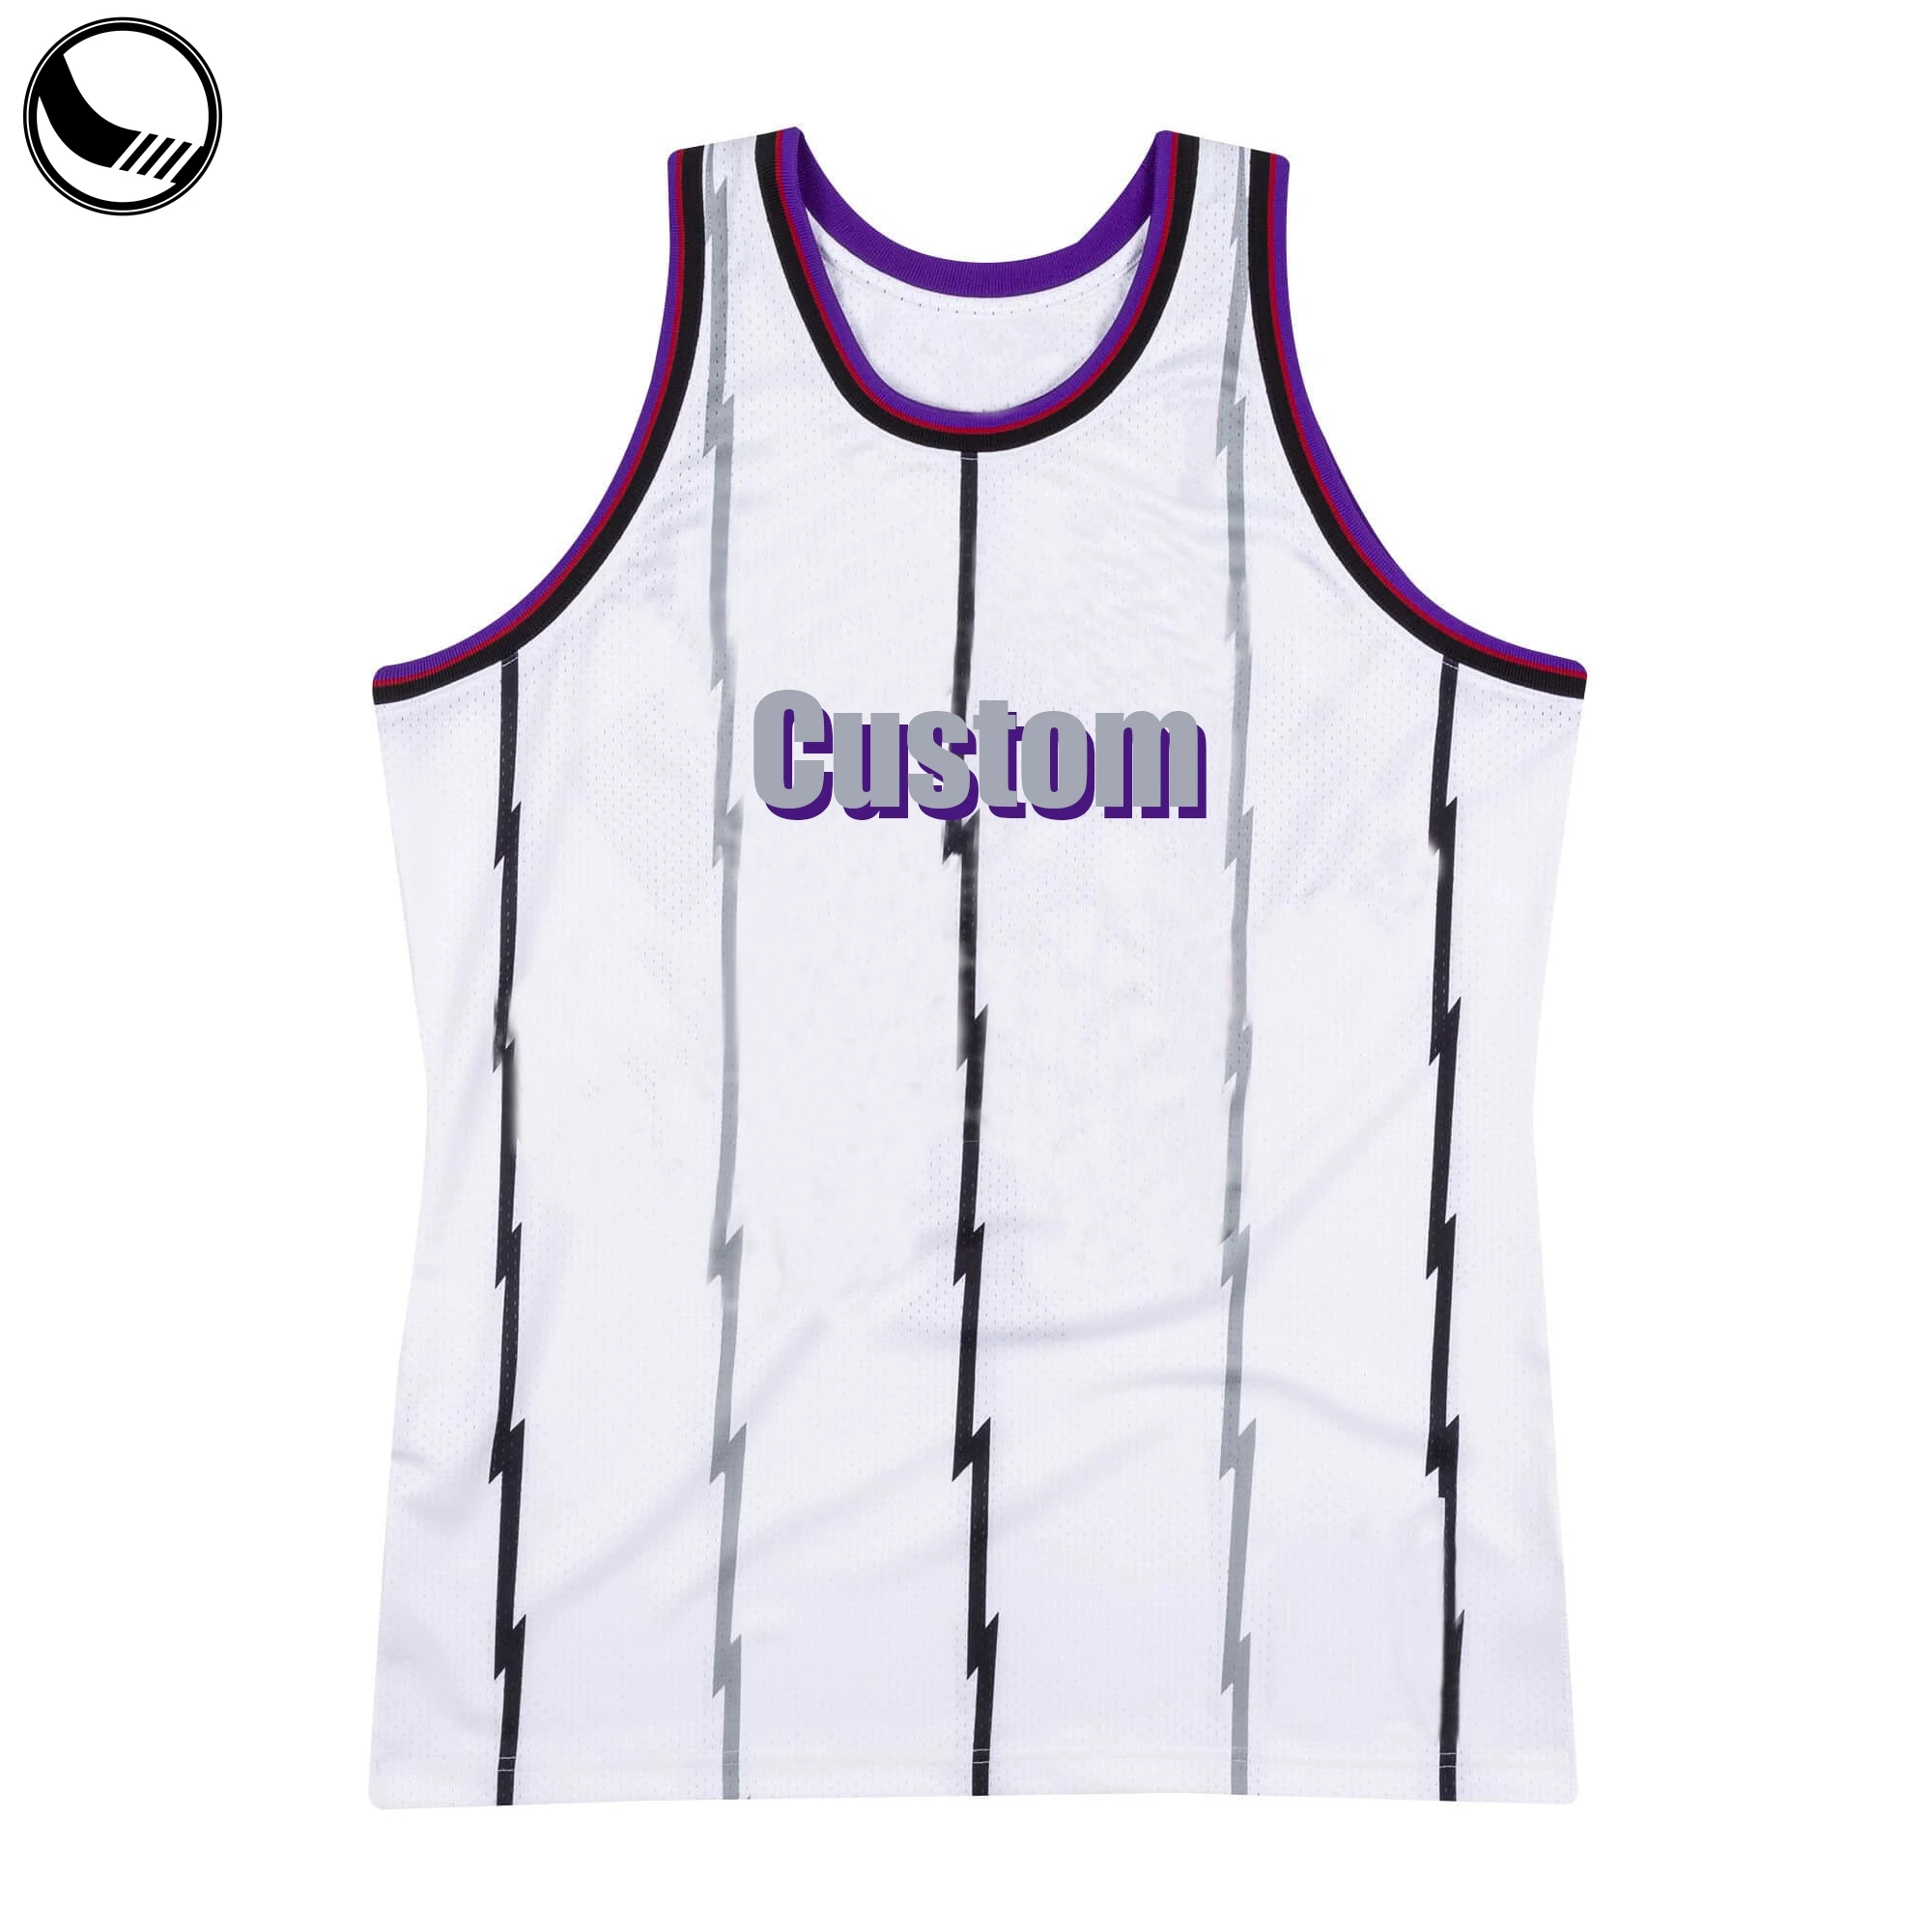 BASKETBALL SPURS 11 JERSEY FREE CUSTOMIZE OF NAME AND NUMBER ONLY full  sublimation high quality fabrics/ trending jersey